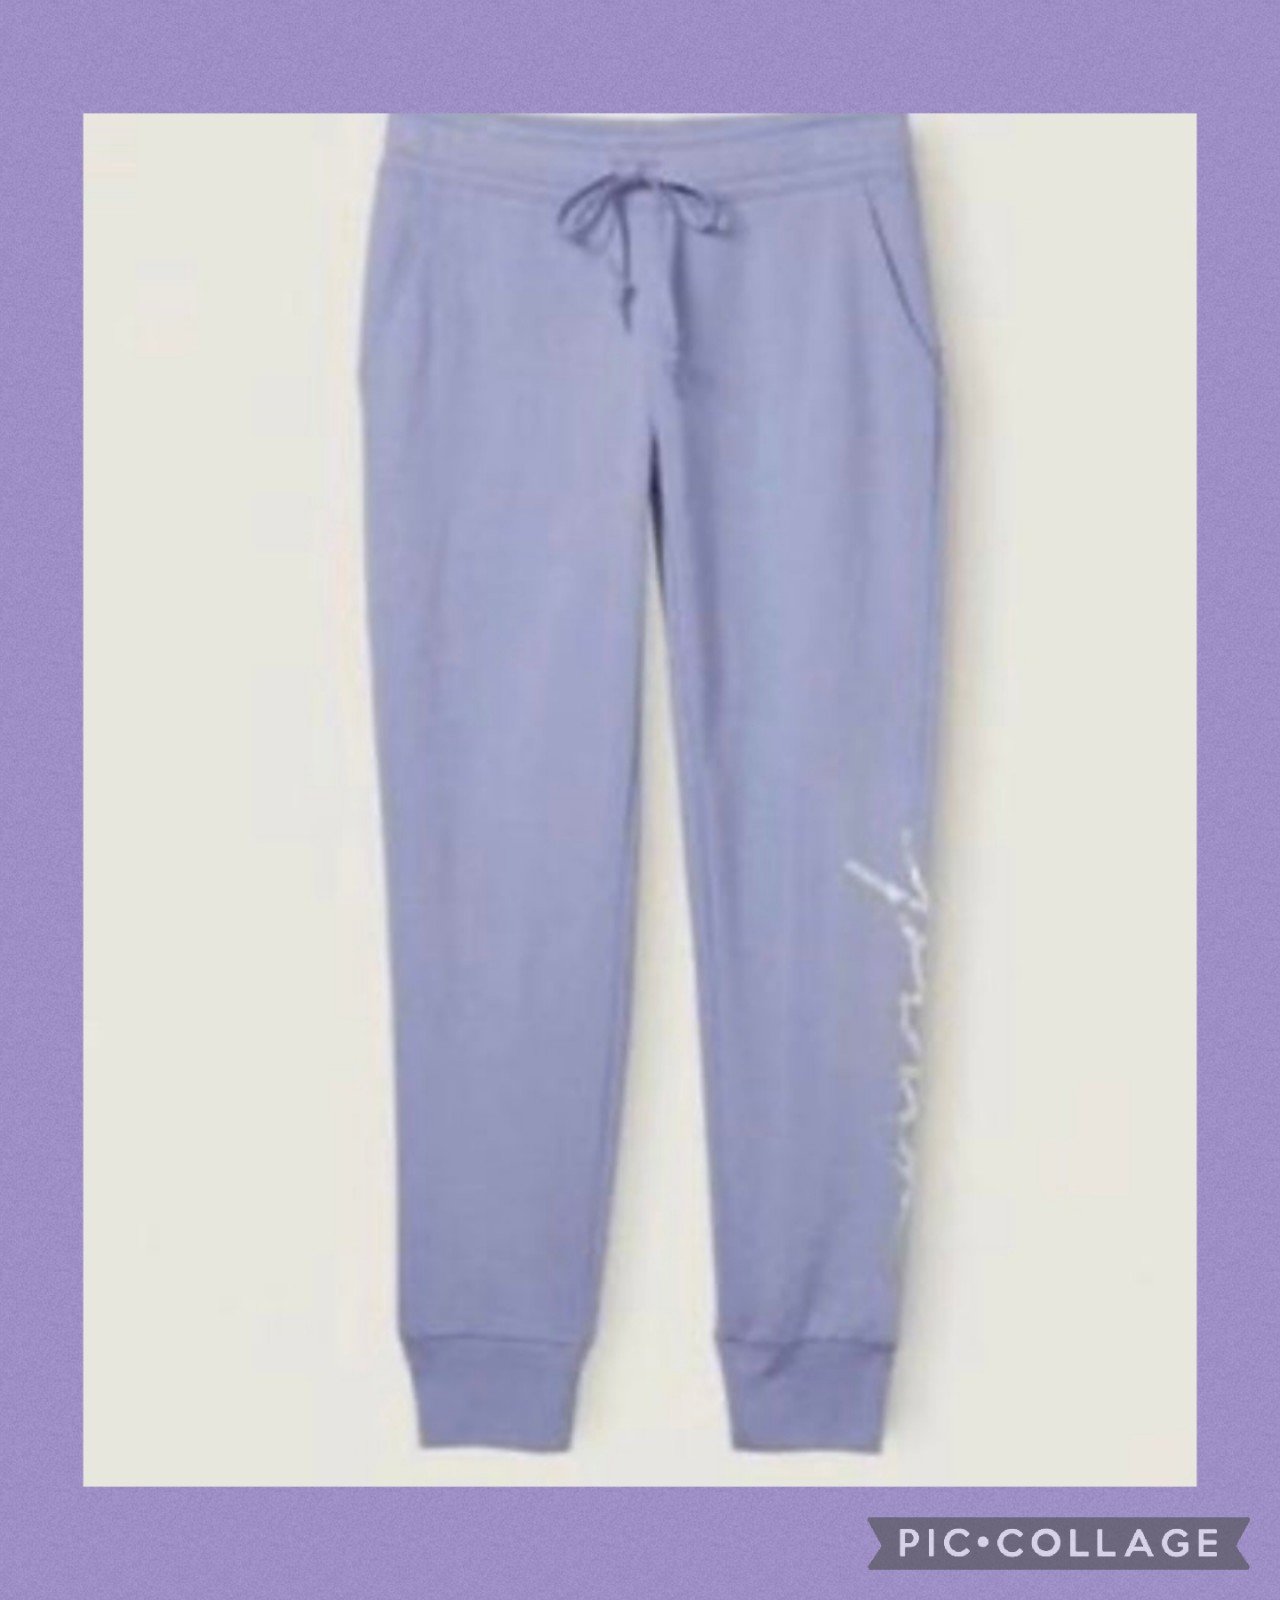 Amazing VS Pink Everyday joggers size XXL NoOHTLZrV US Outlet